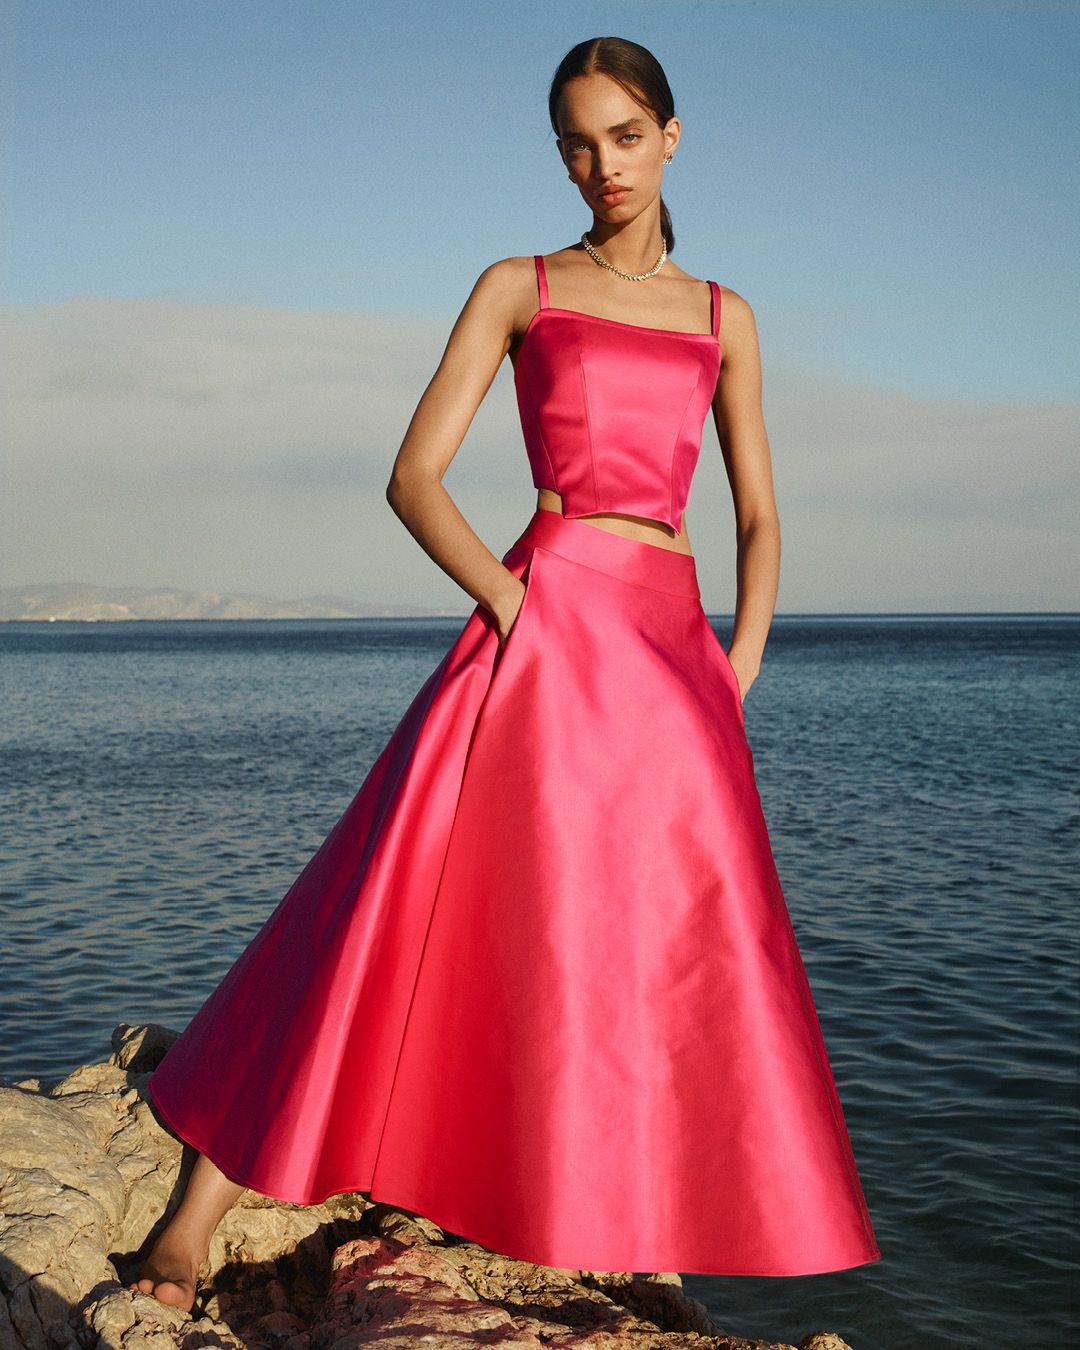 Model standing in front of the ocean wearing a matching fuschia satin bustier and high-waisted skirt